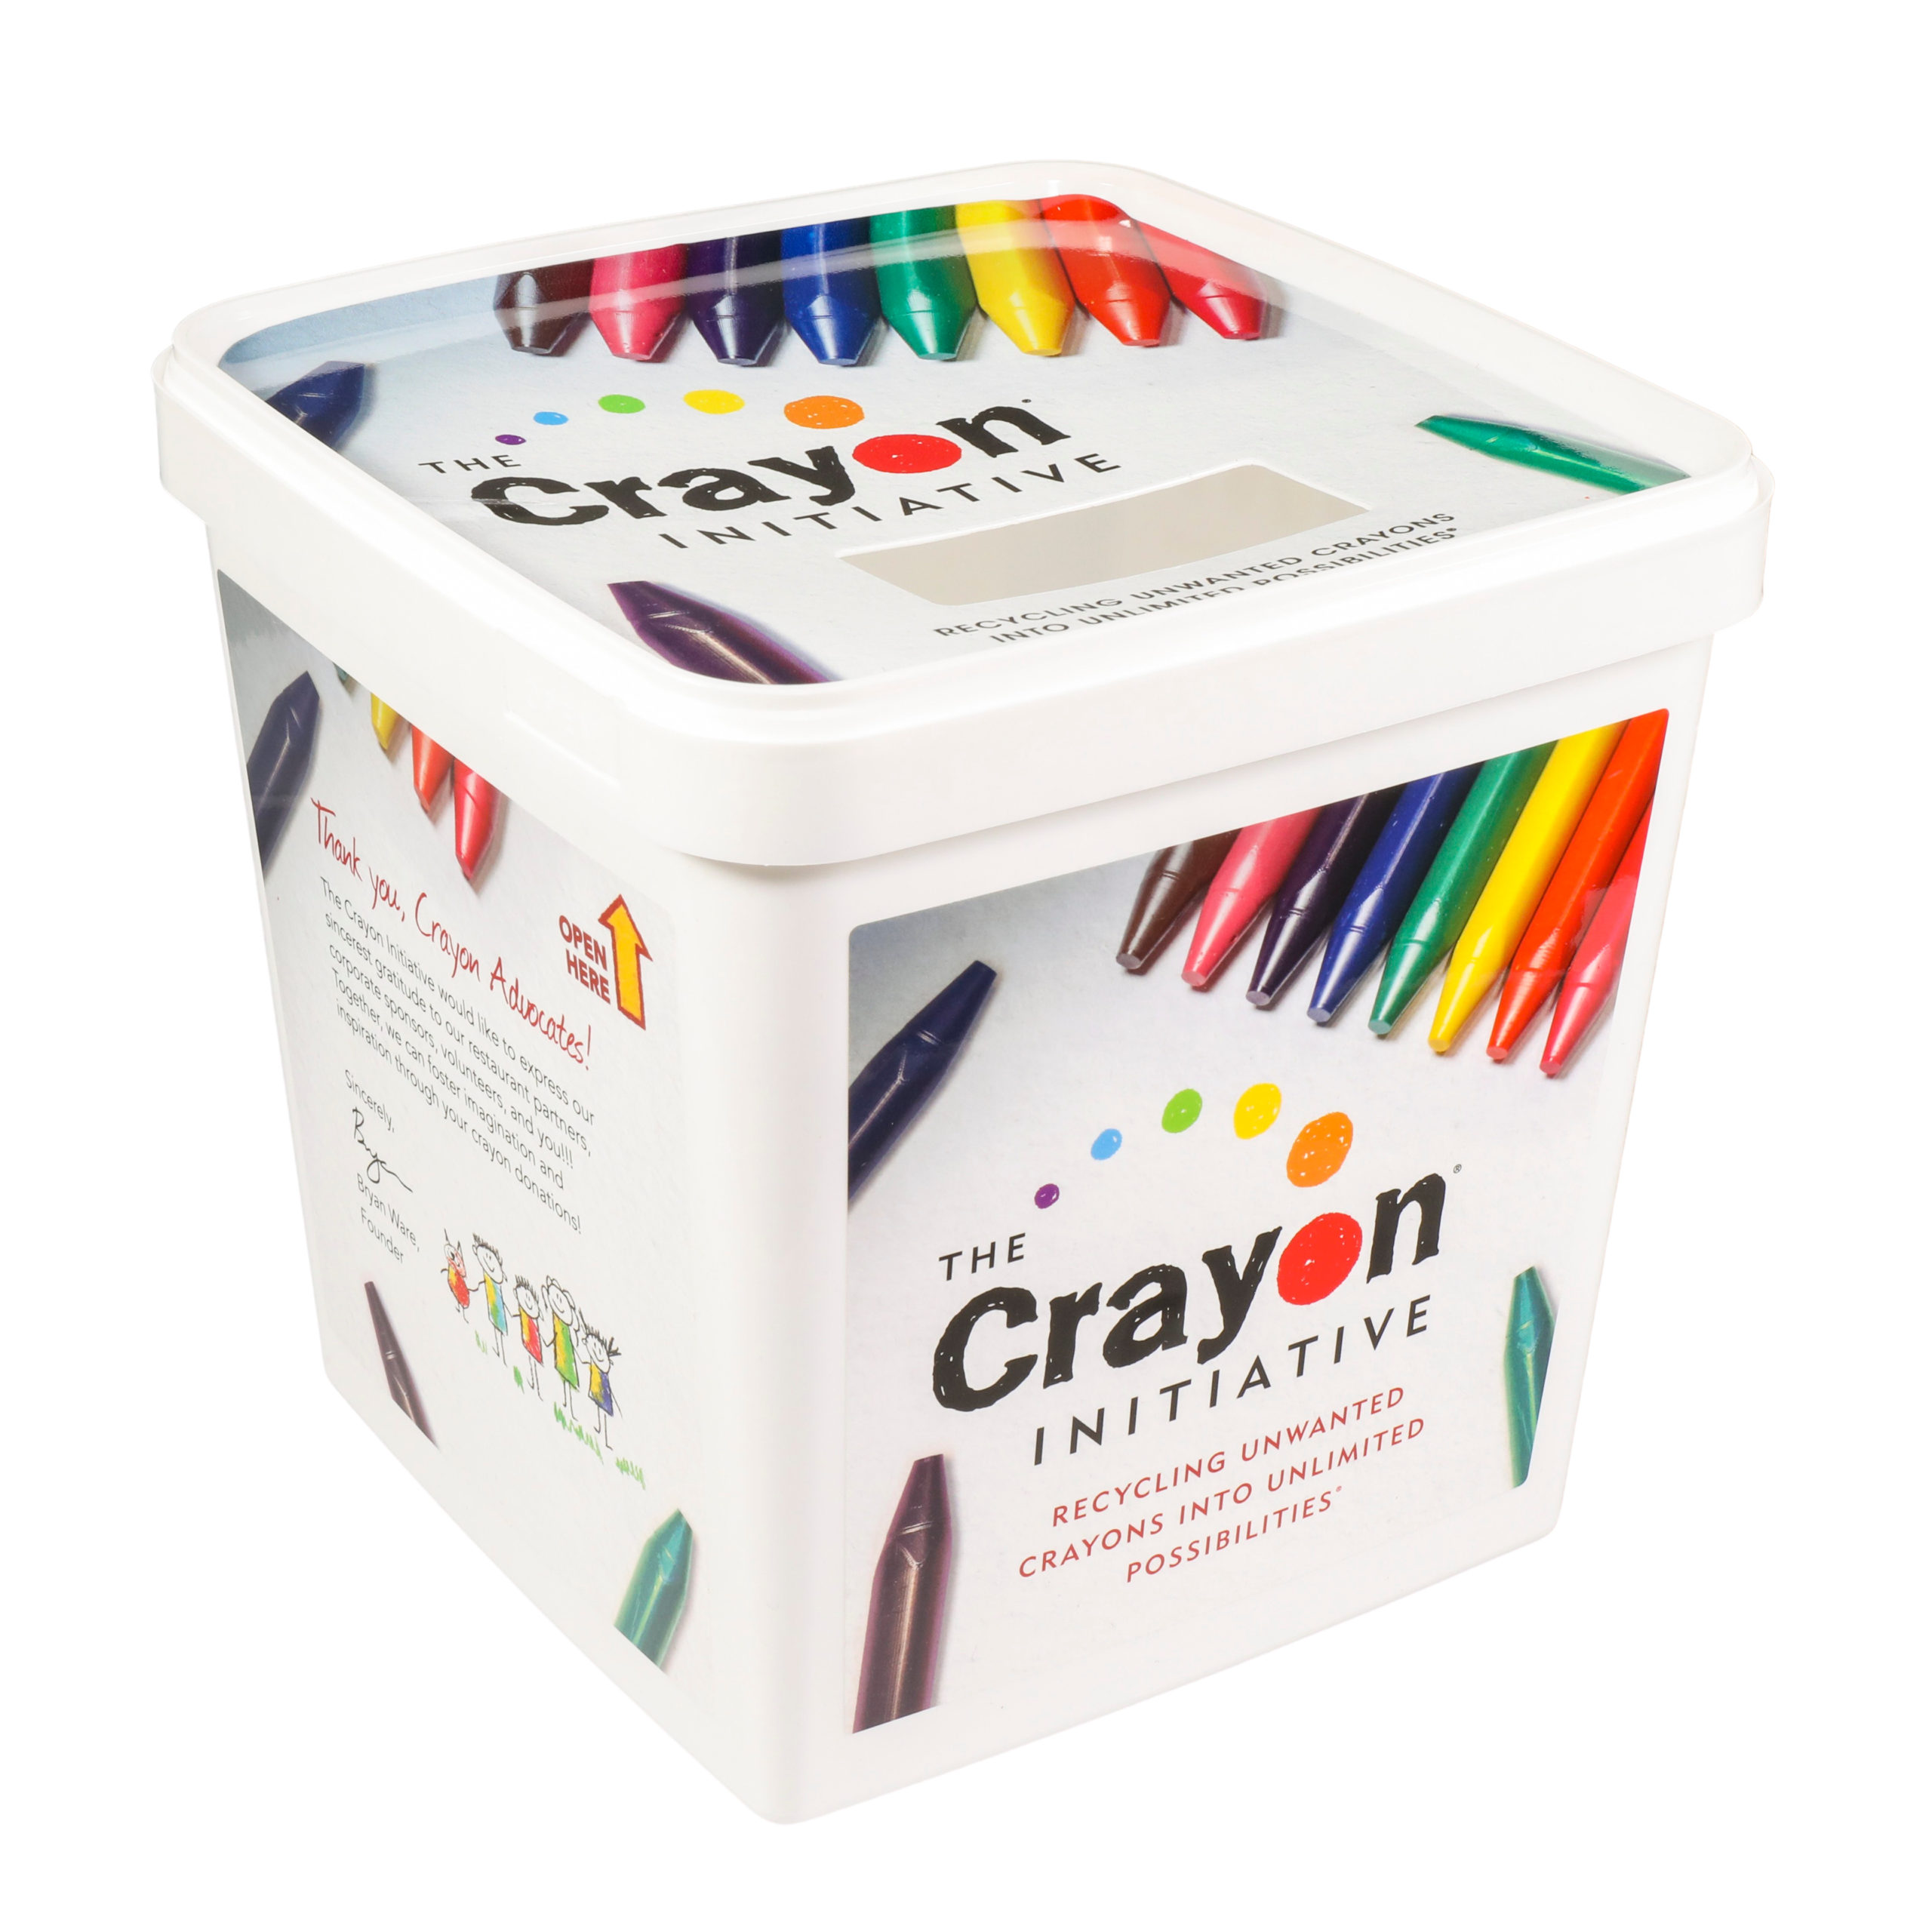 Plastic Crayon Collection Box Crayon Graphic The